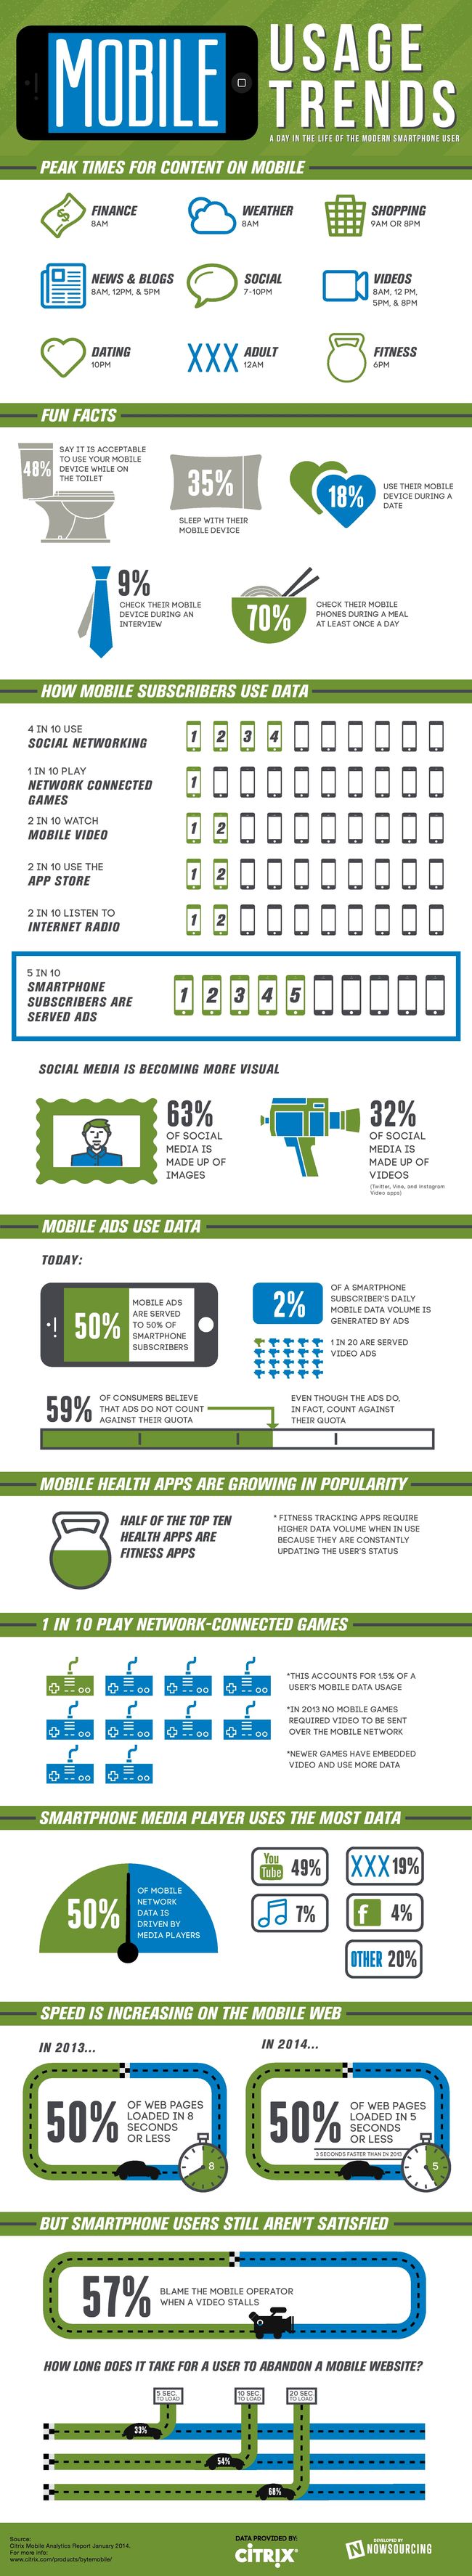 mobile-usage-trends